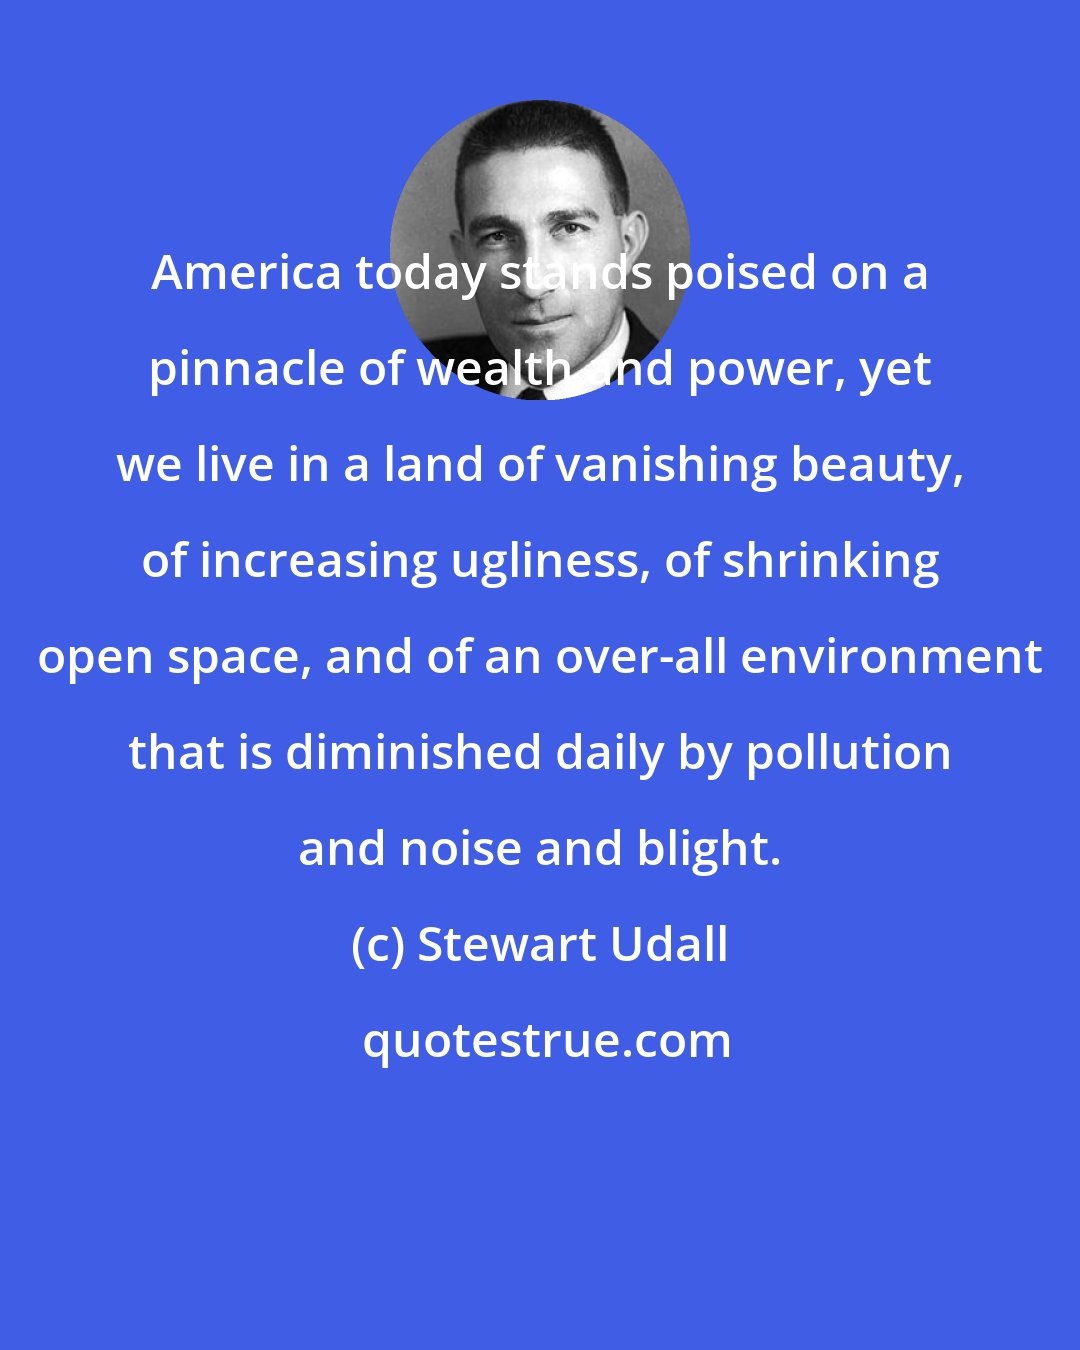 Stewart Udall: America today stands poised on a pinnacle of wealth and power, yet we live in a land of vanishing beauty, of increasing ugliness, of shrinking open space, and of an over-all environment that is diminished daily by pollution and noise and blight.